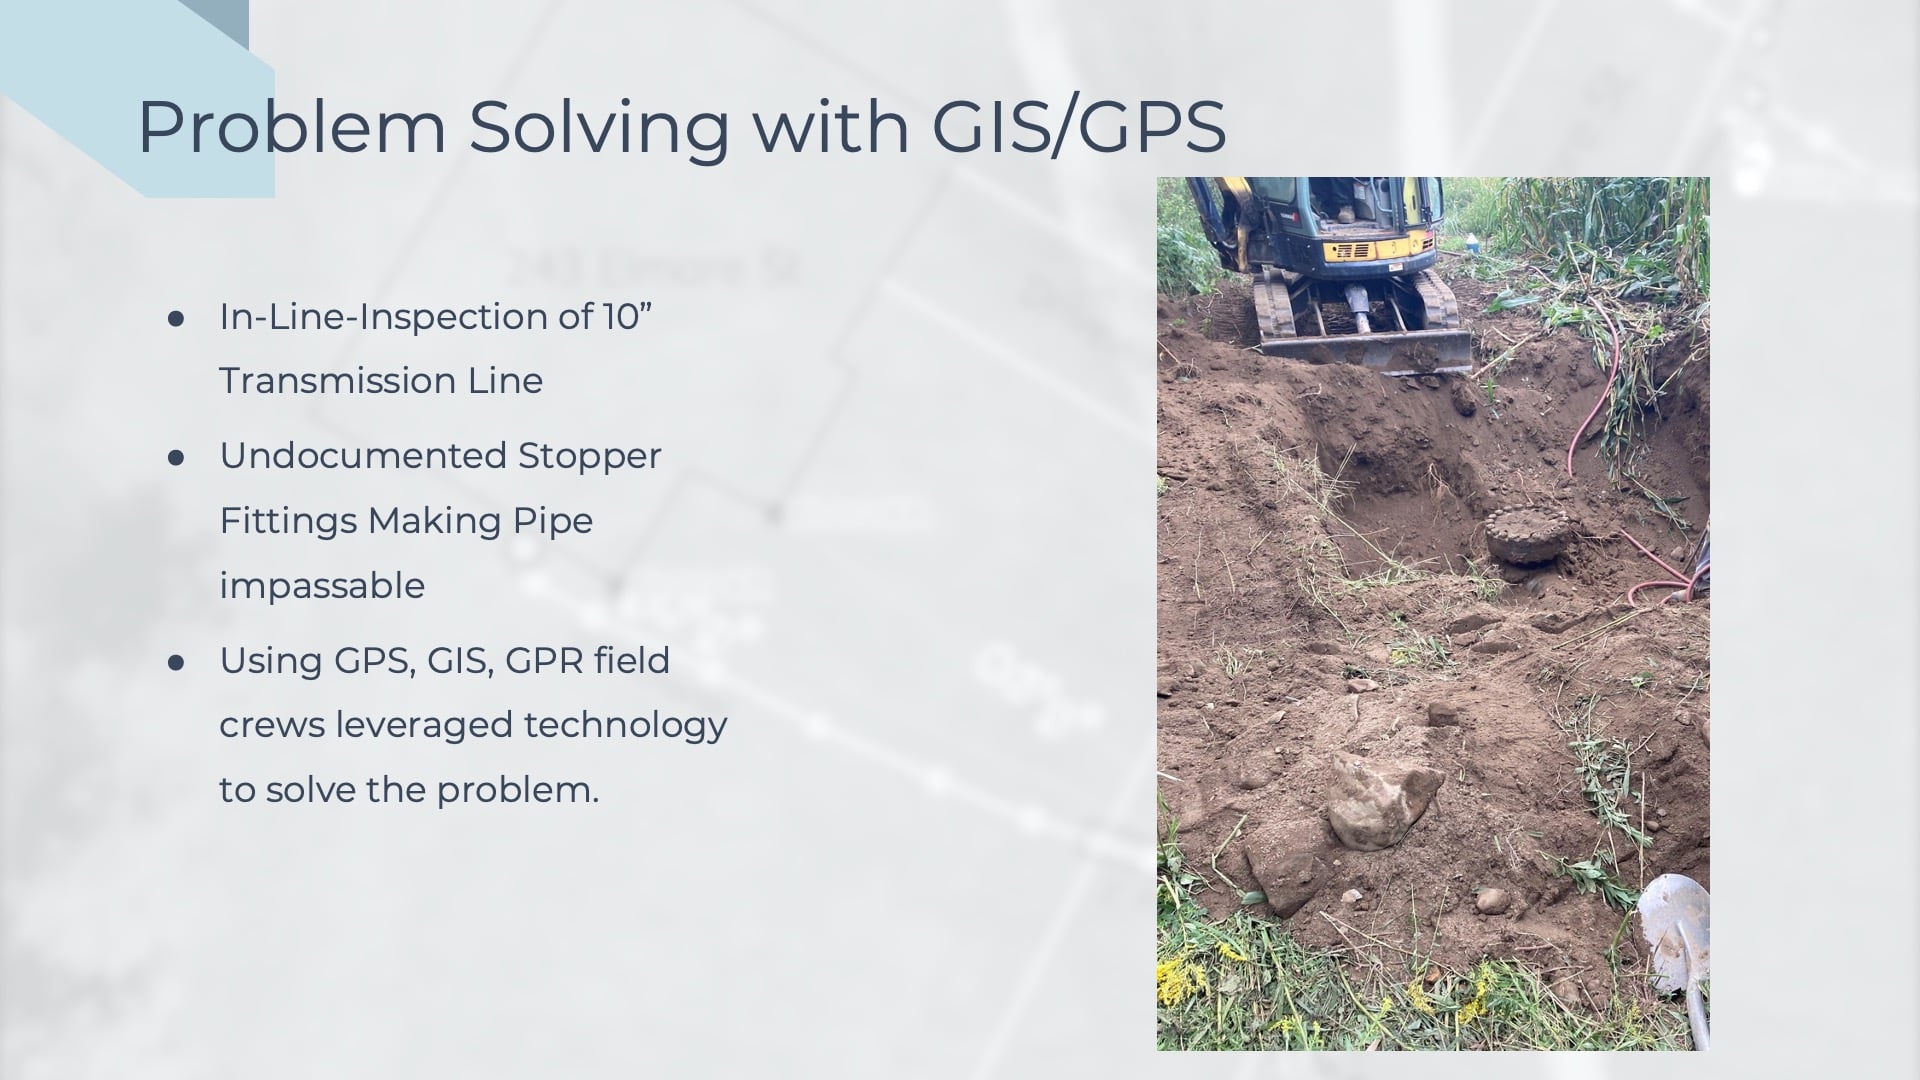 In the final slide of "Problem Solving with GIS/GPS" section, a close-up view of the discovered asset is shown. In the dirt, they find a "phantom" (or, previously undiscovered) stopper they found in their excavations of the field. Their suspicions were correct from the overhead imagery, and they were able to find the asset.